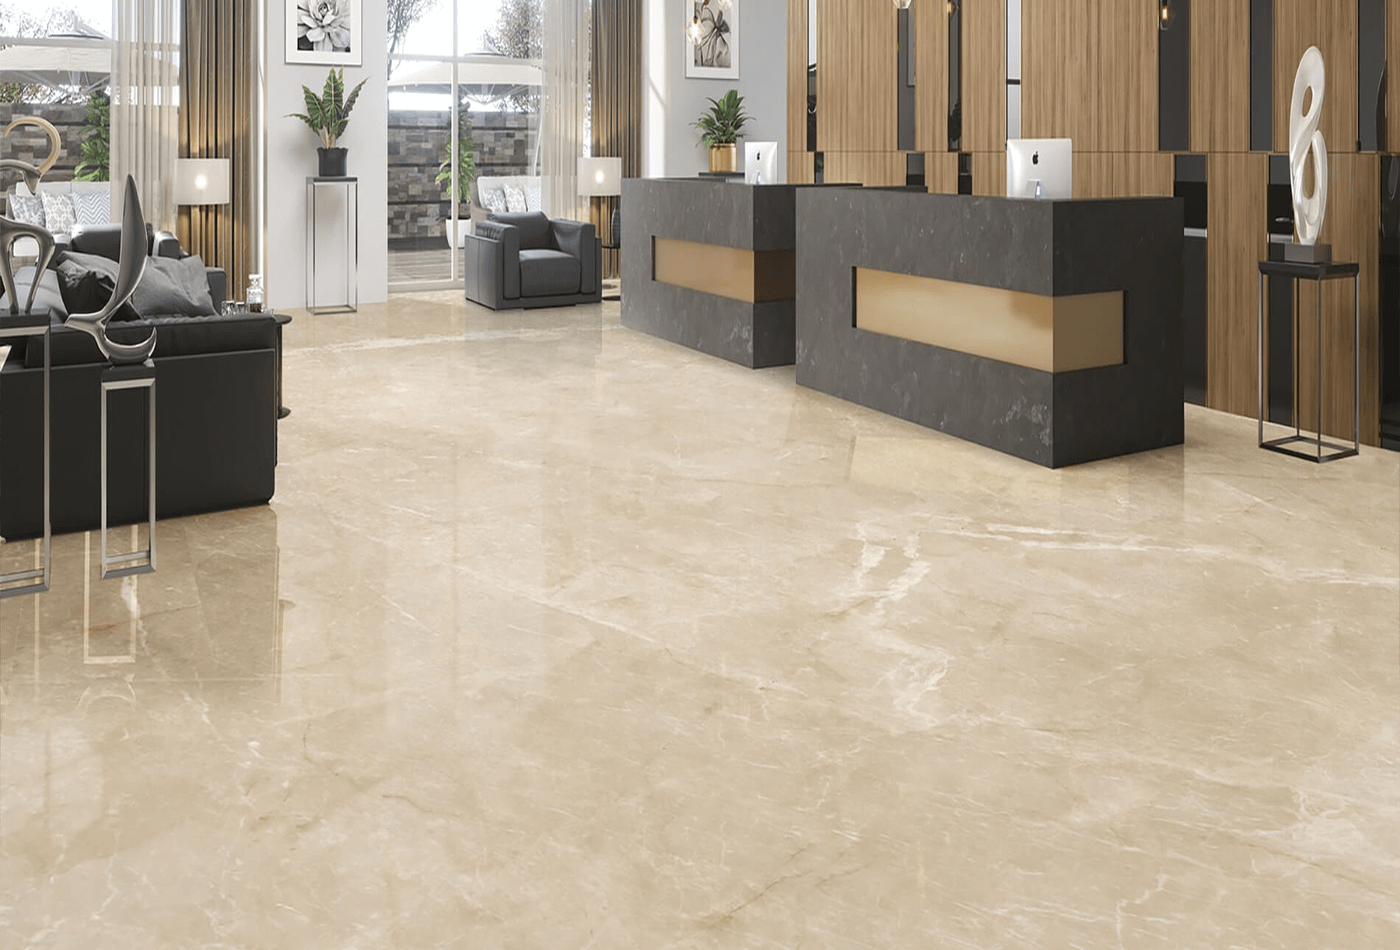 Is Cream Granite a Perfect Addon to Your Home?